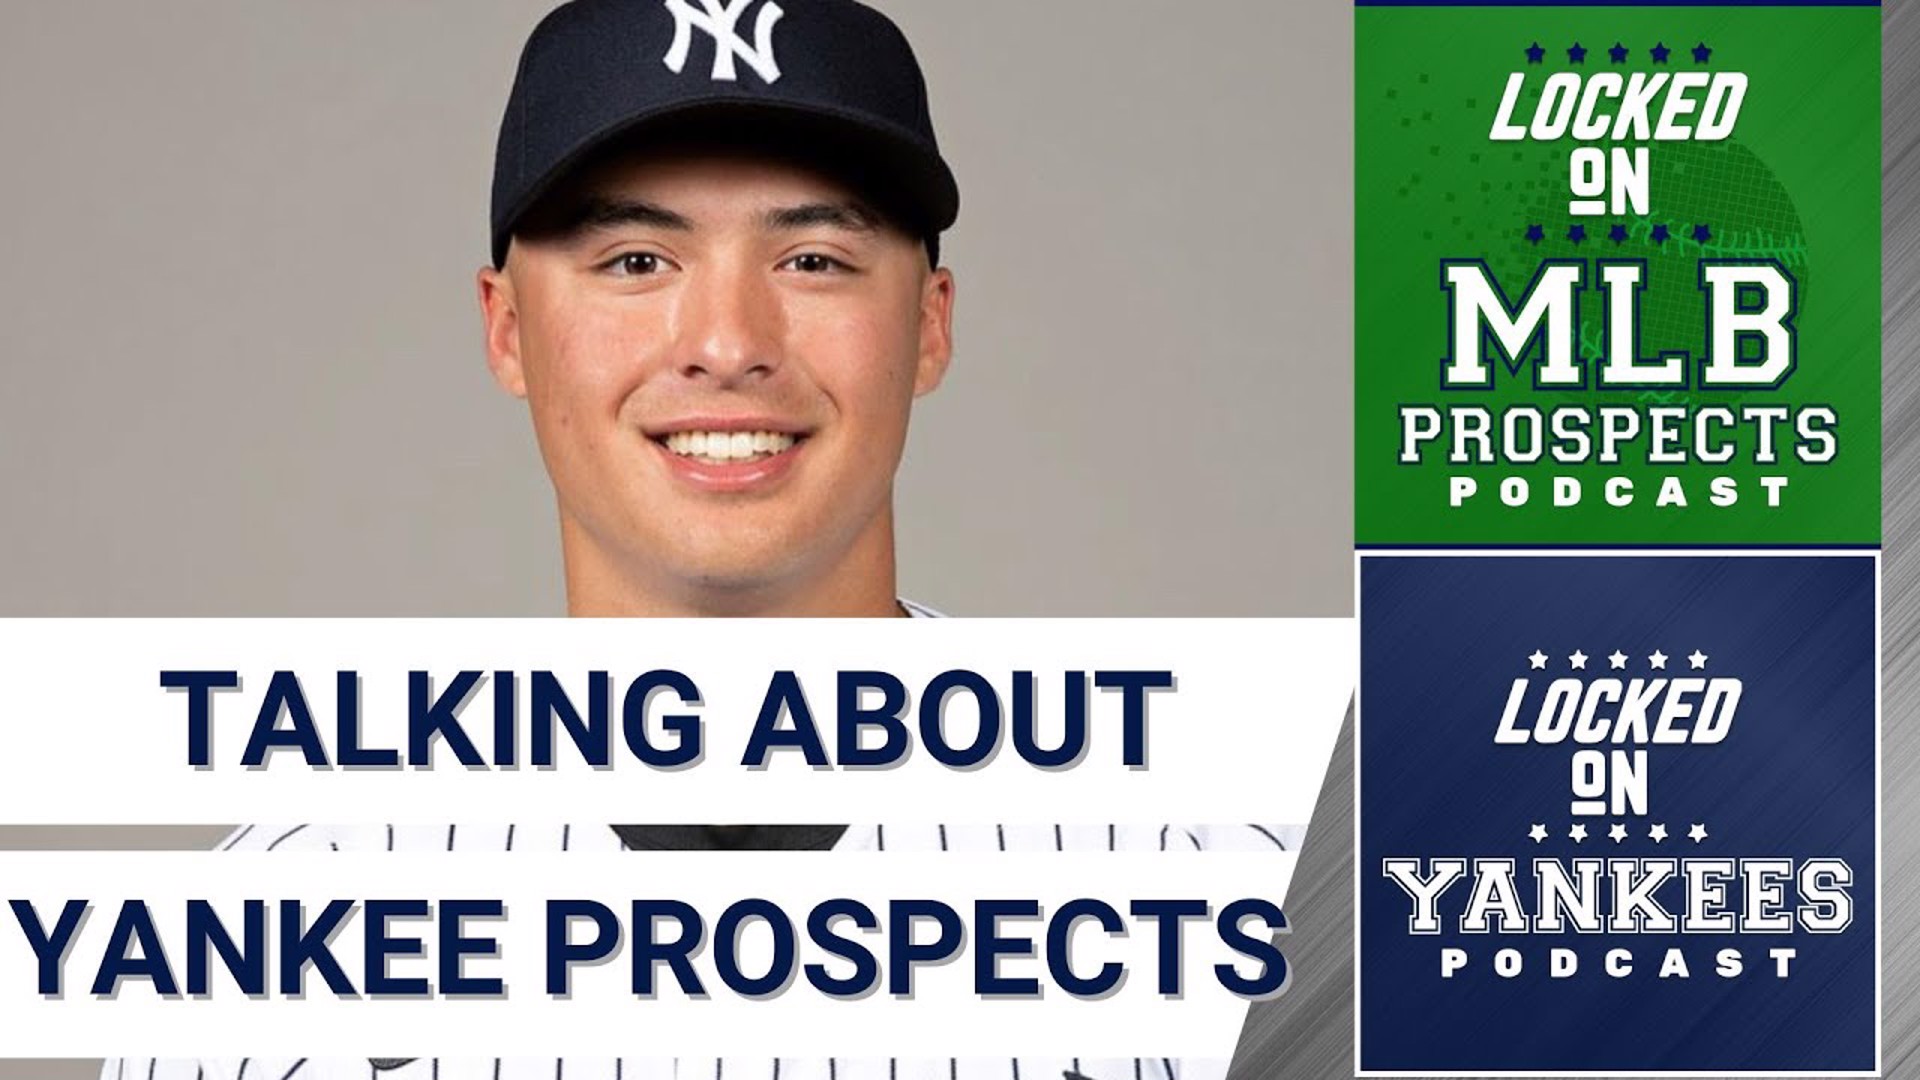 Stacey and Lindsay Crosby of Locked On MLB Prospects discuss Yankees prospects, Jasson Dominguez.